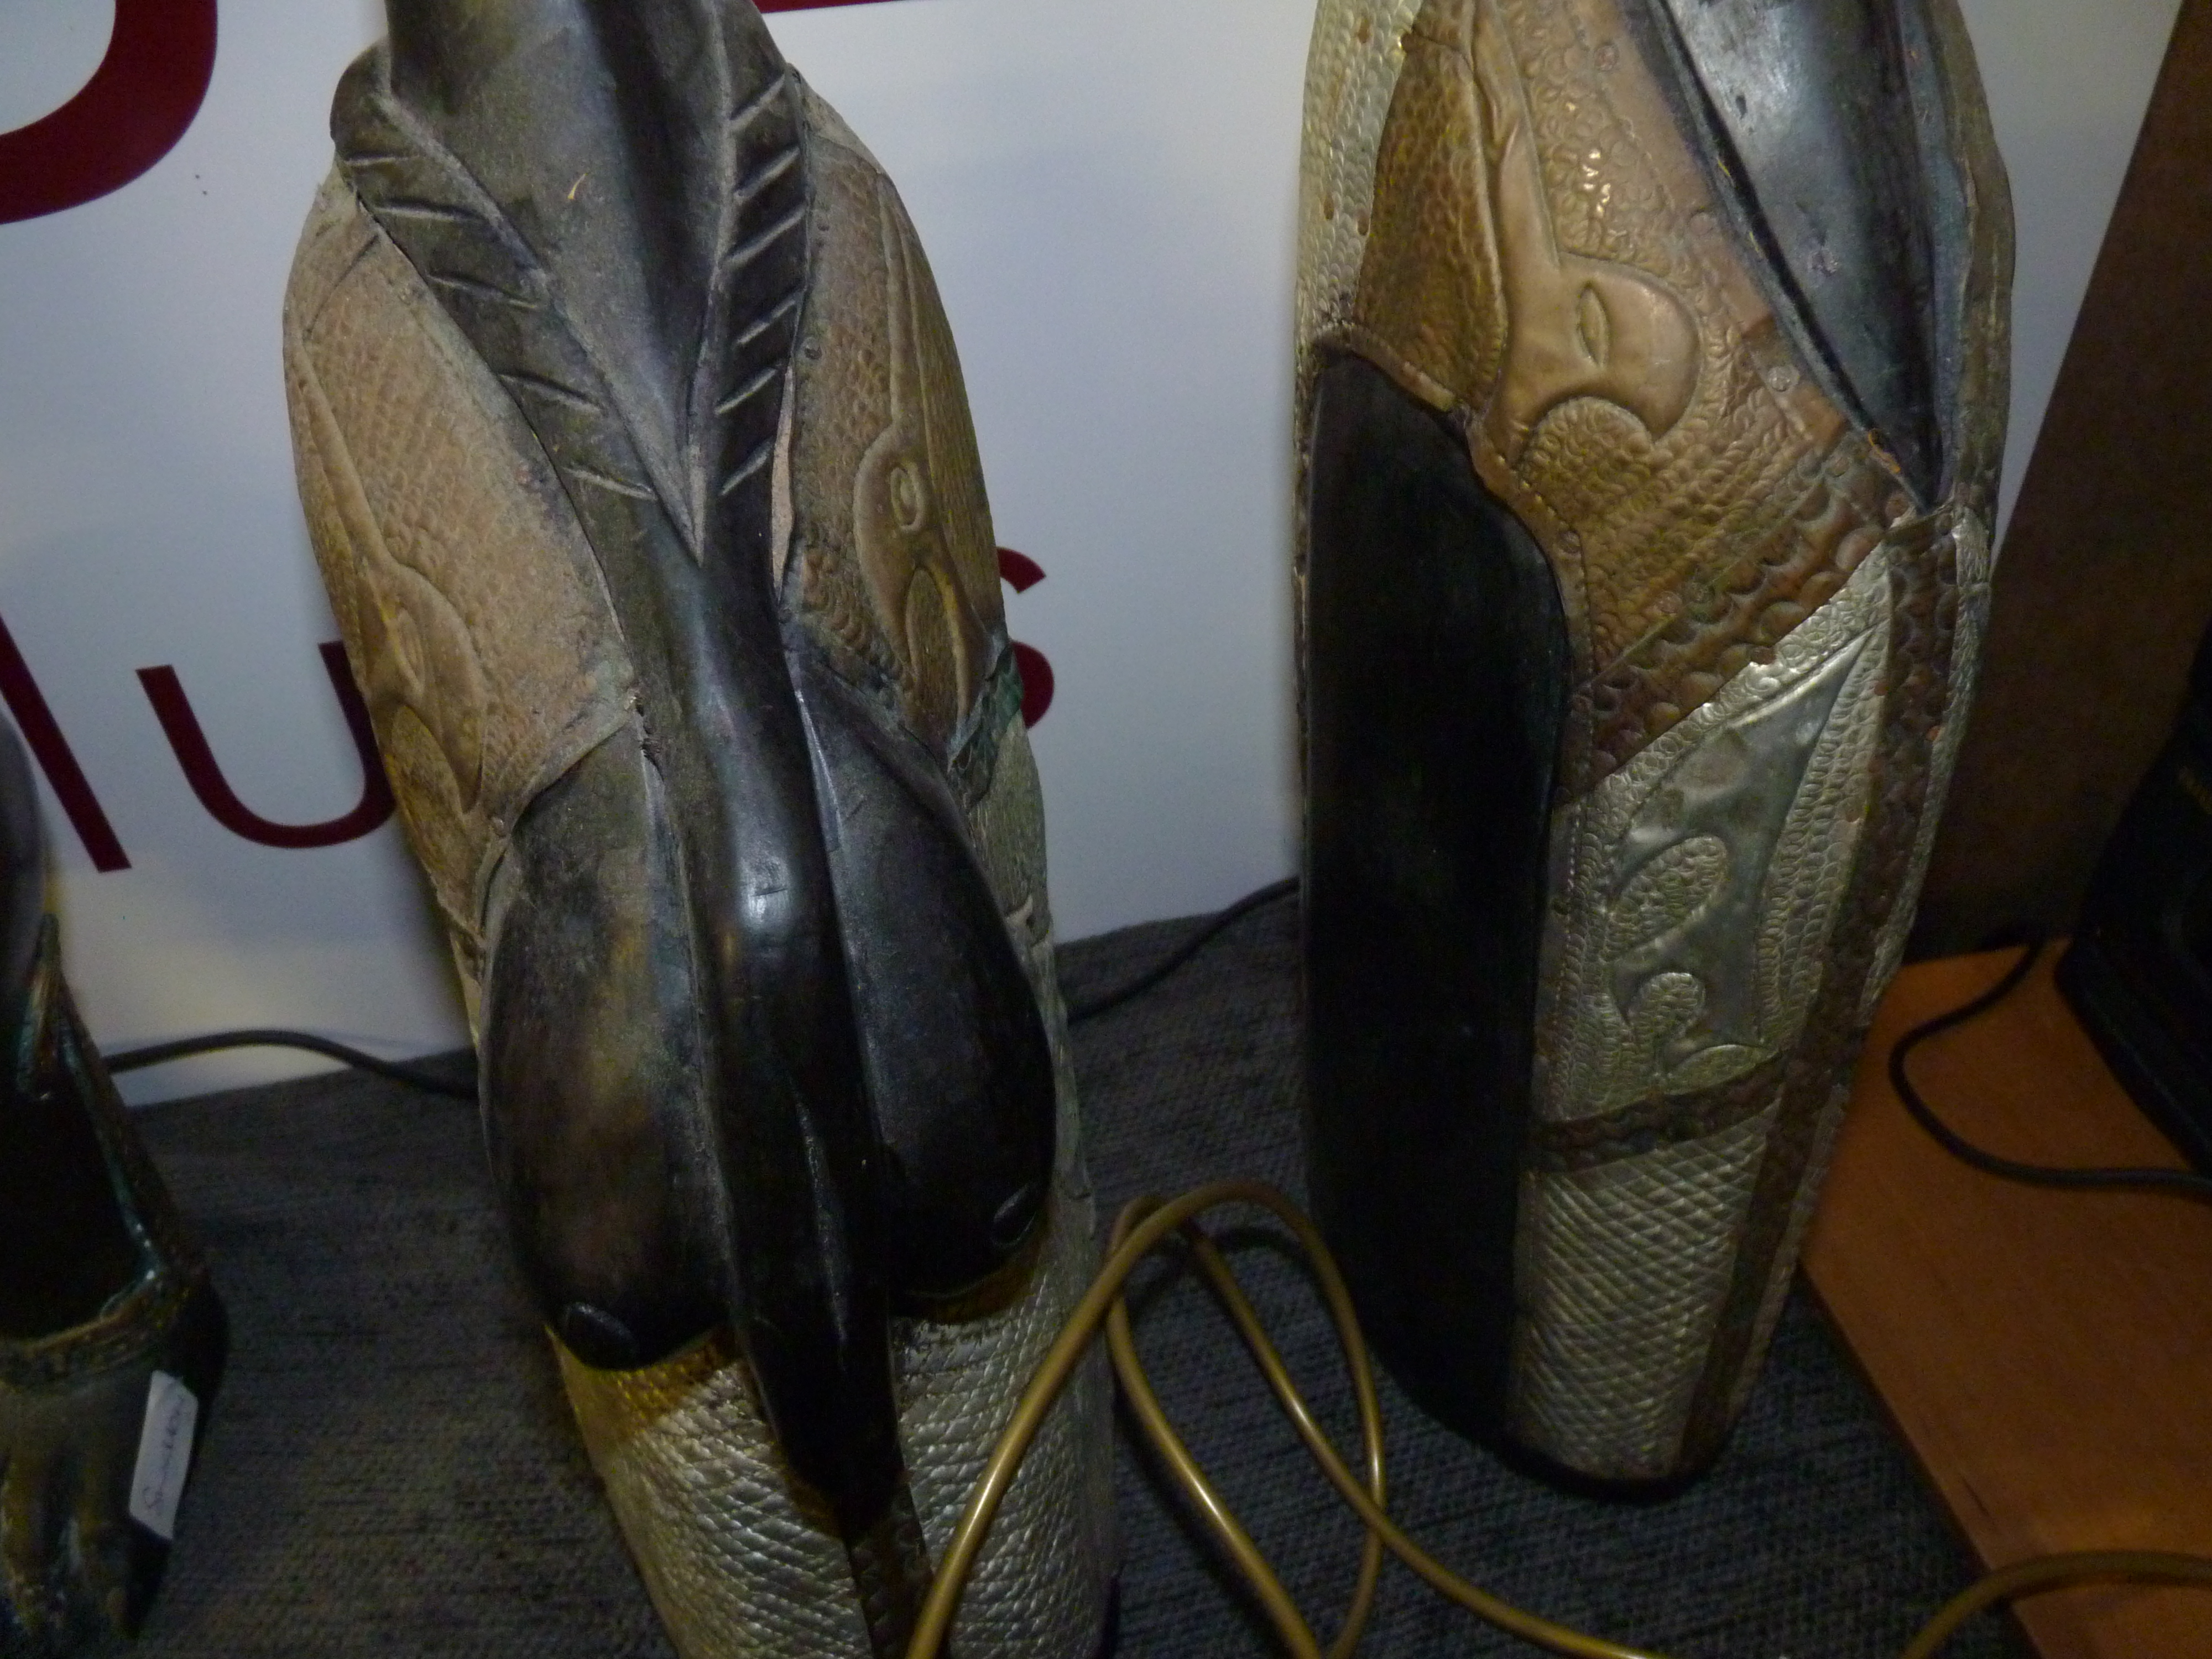 Pair of Wooden and metallic sankofa male and female floor figures standing 1m high - Image 3 of 5